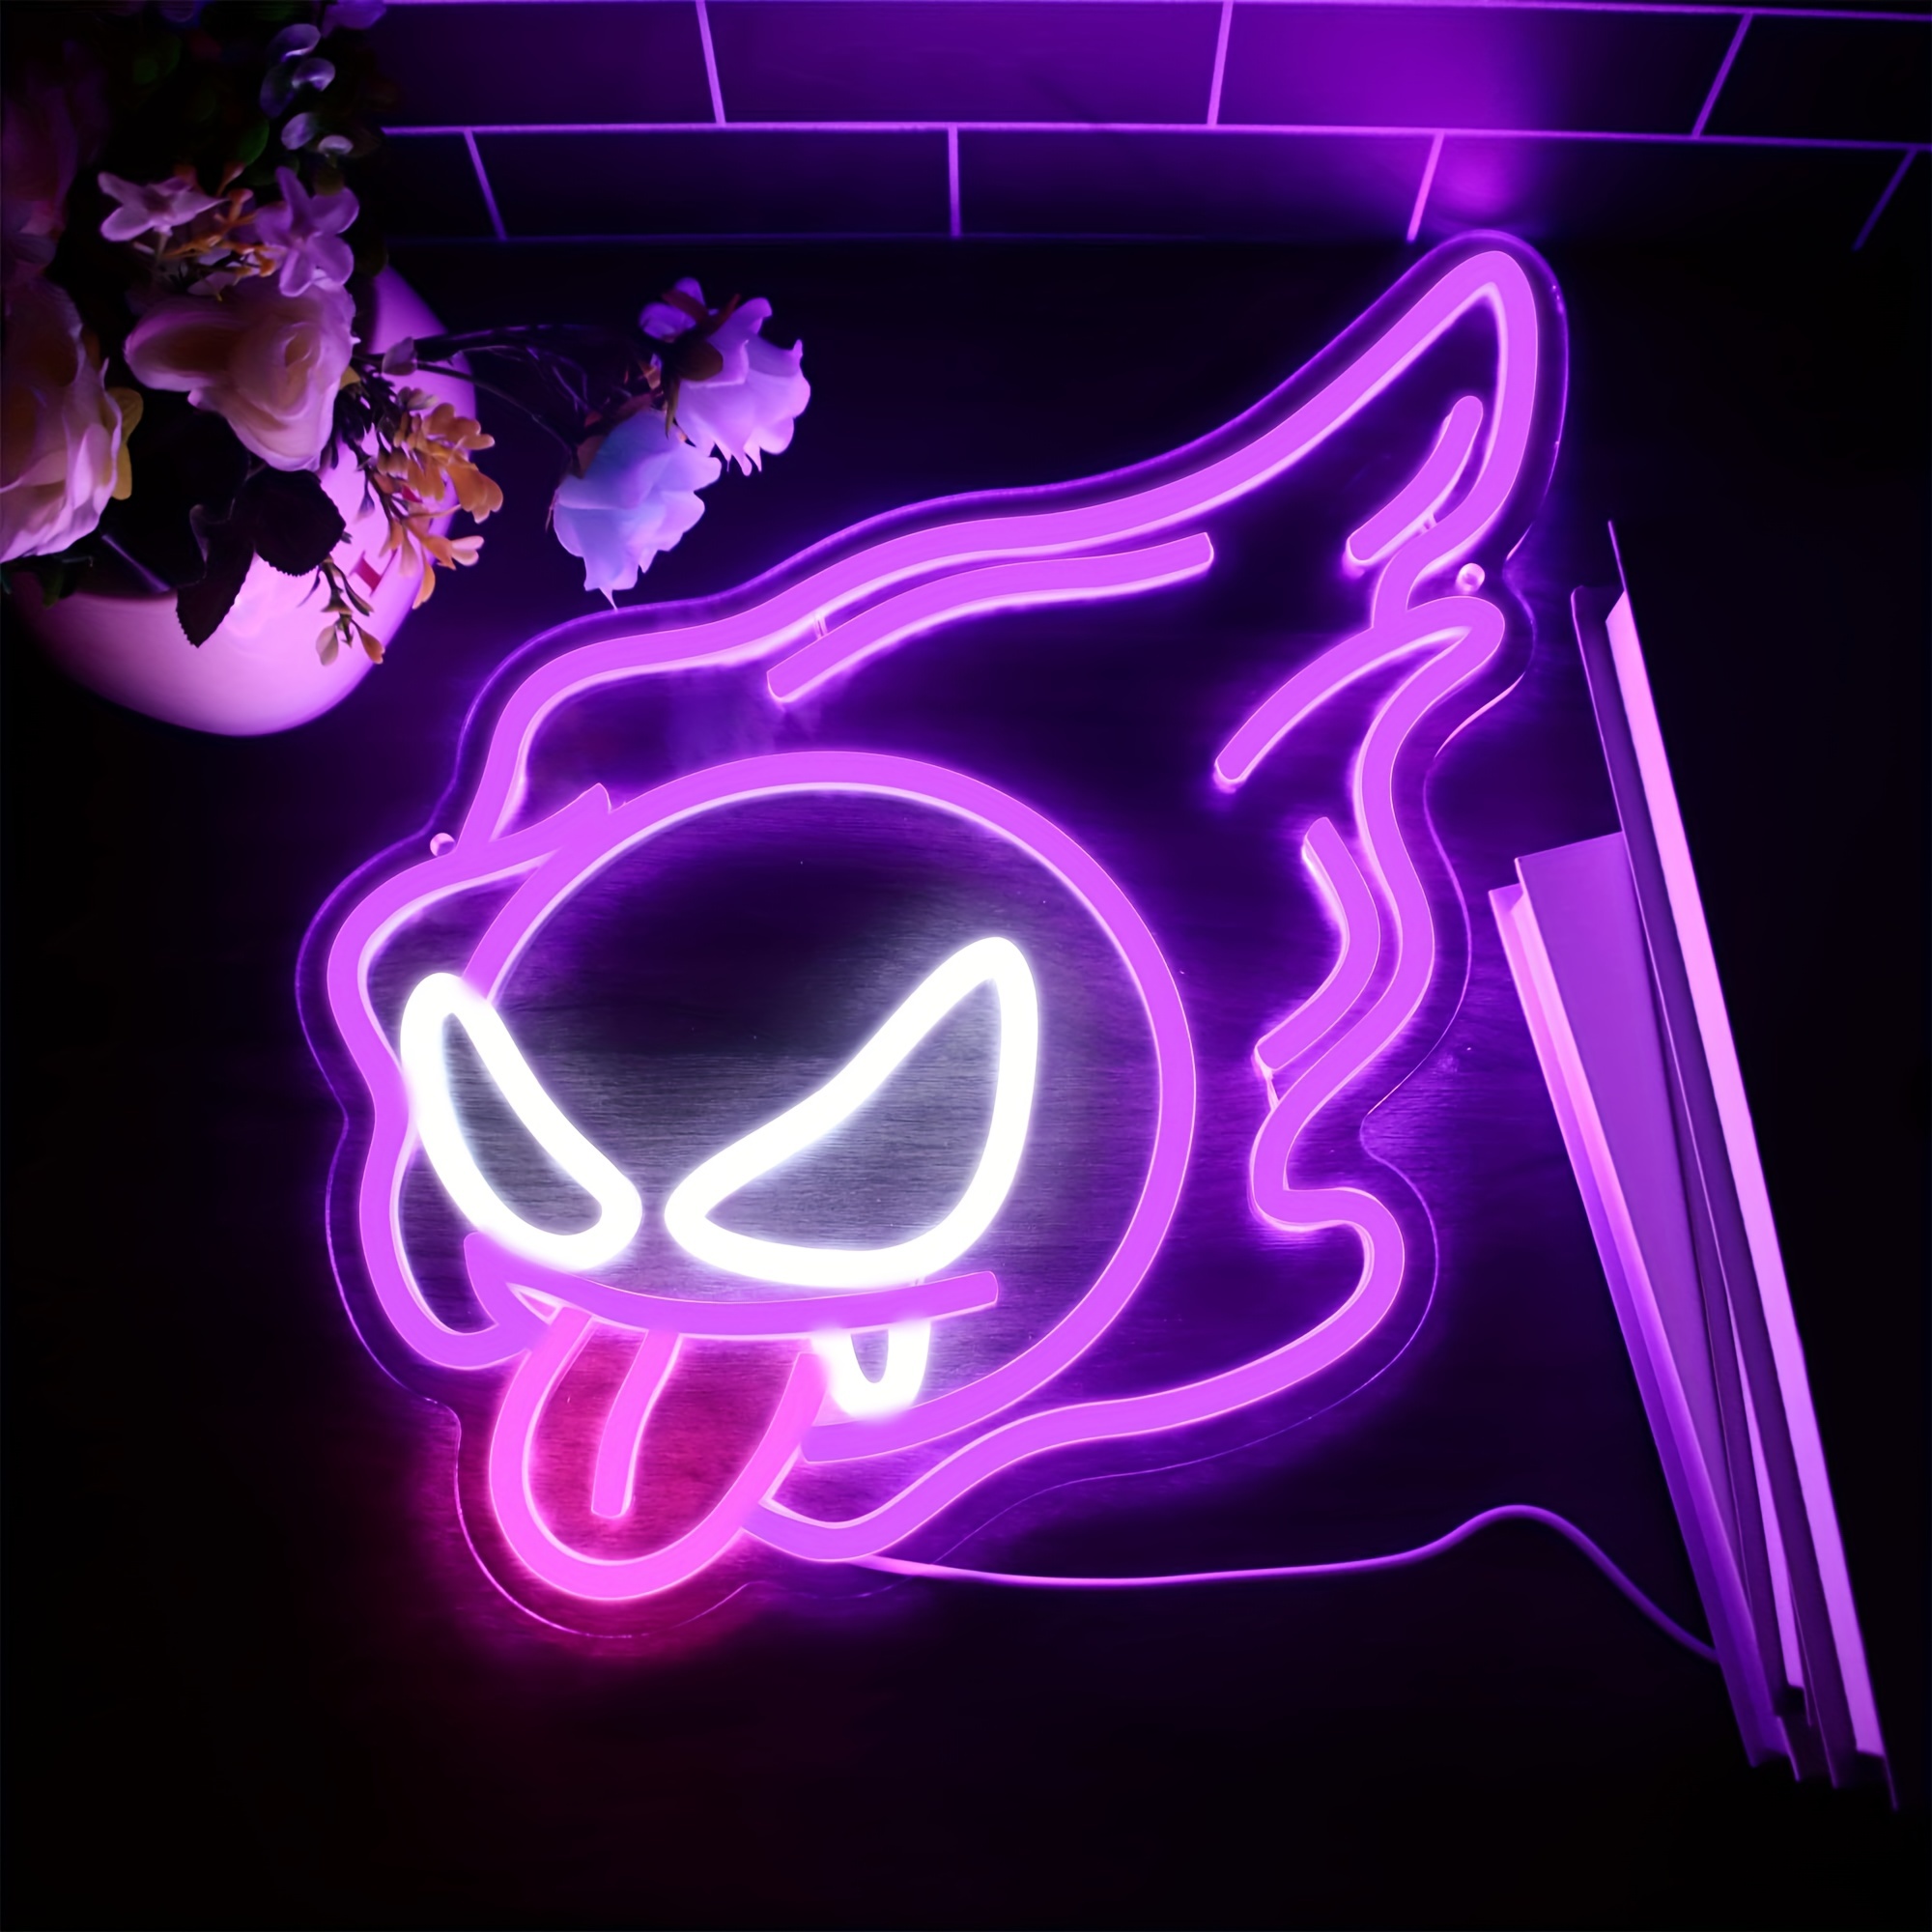 ANIME NEON LIGHT SIGN LED Computer Room Wall Decor FURNITURE OFFICE ART  TWITCH | eBay